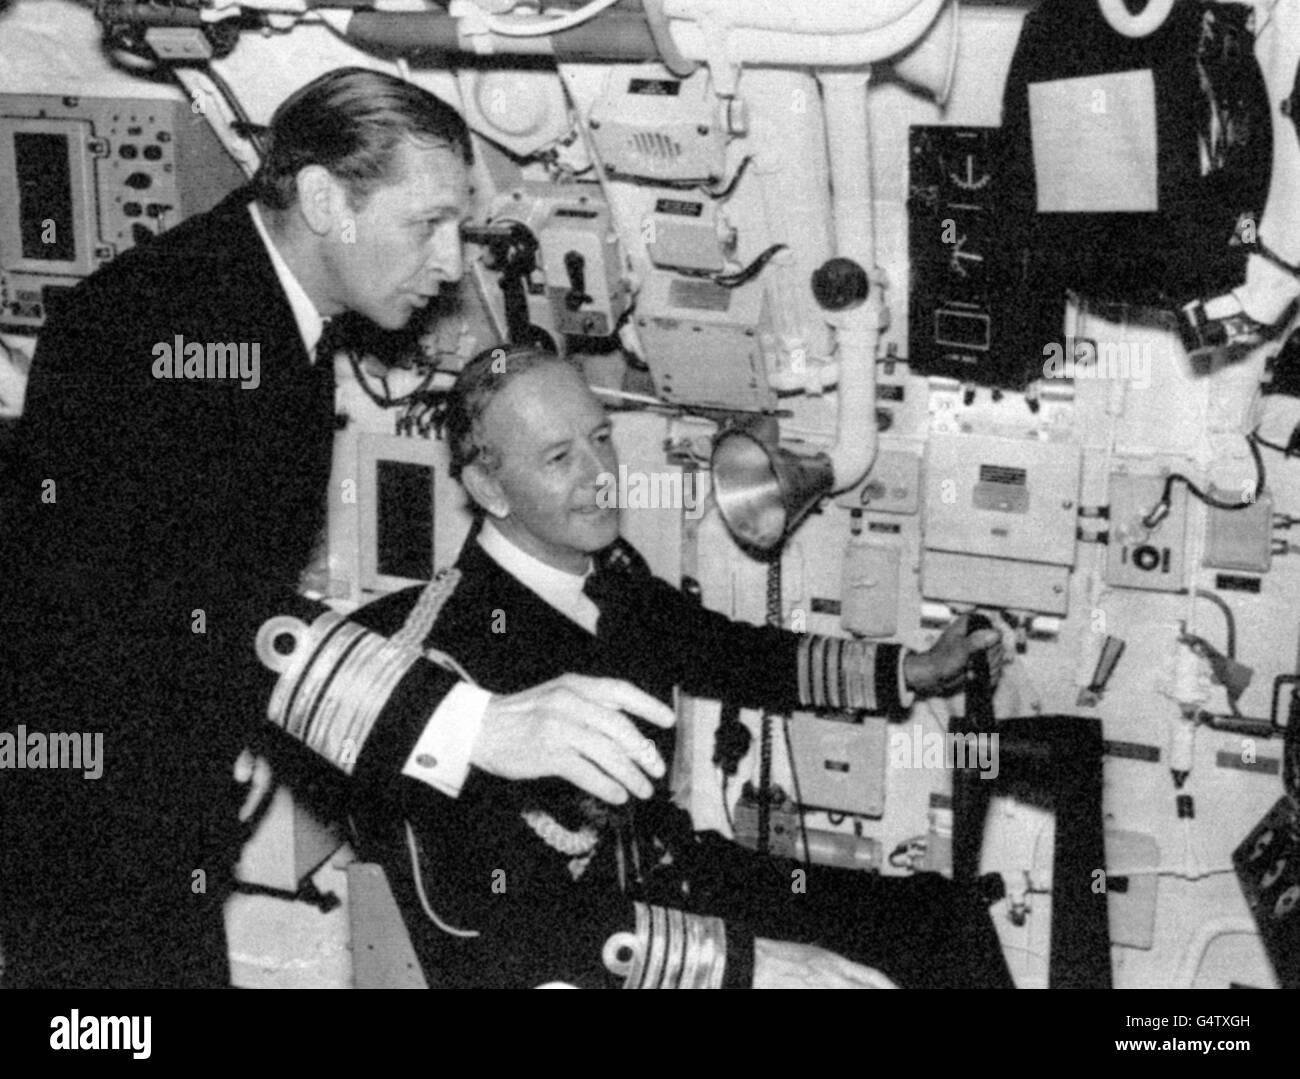 At the commissioning of HMS Sovereign, the Royal Navy's eighth nuclear submarine to come into service, Vice Admiral Iwan Raikes (l), the new Flag Officer Submarines, explains the ship's control panel to the seated First Sea Lord, Admiral Sir Edward Ashmore. Vice Admiral Raikes is official adviser on submarine matters tot he Admiralty Board. Stock Photo